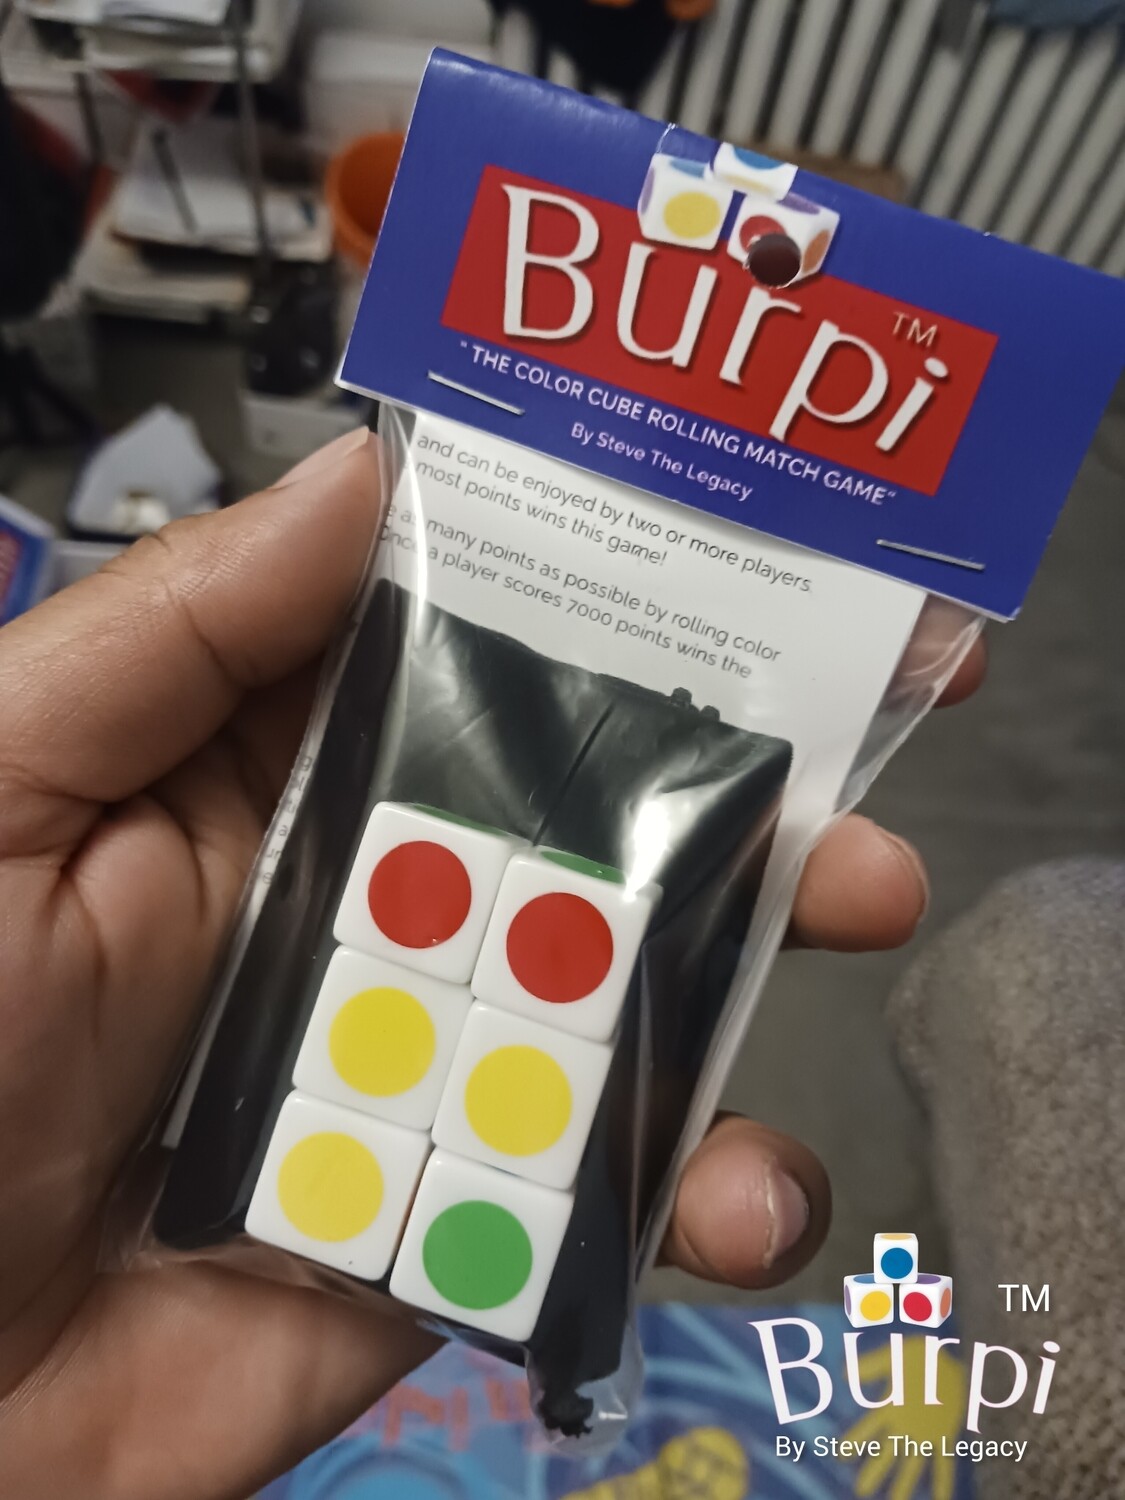 Burpi The Color Cube Point Matching Game By Steve The Legacy 